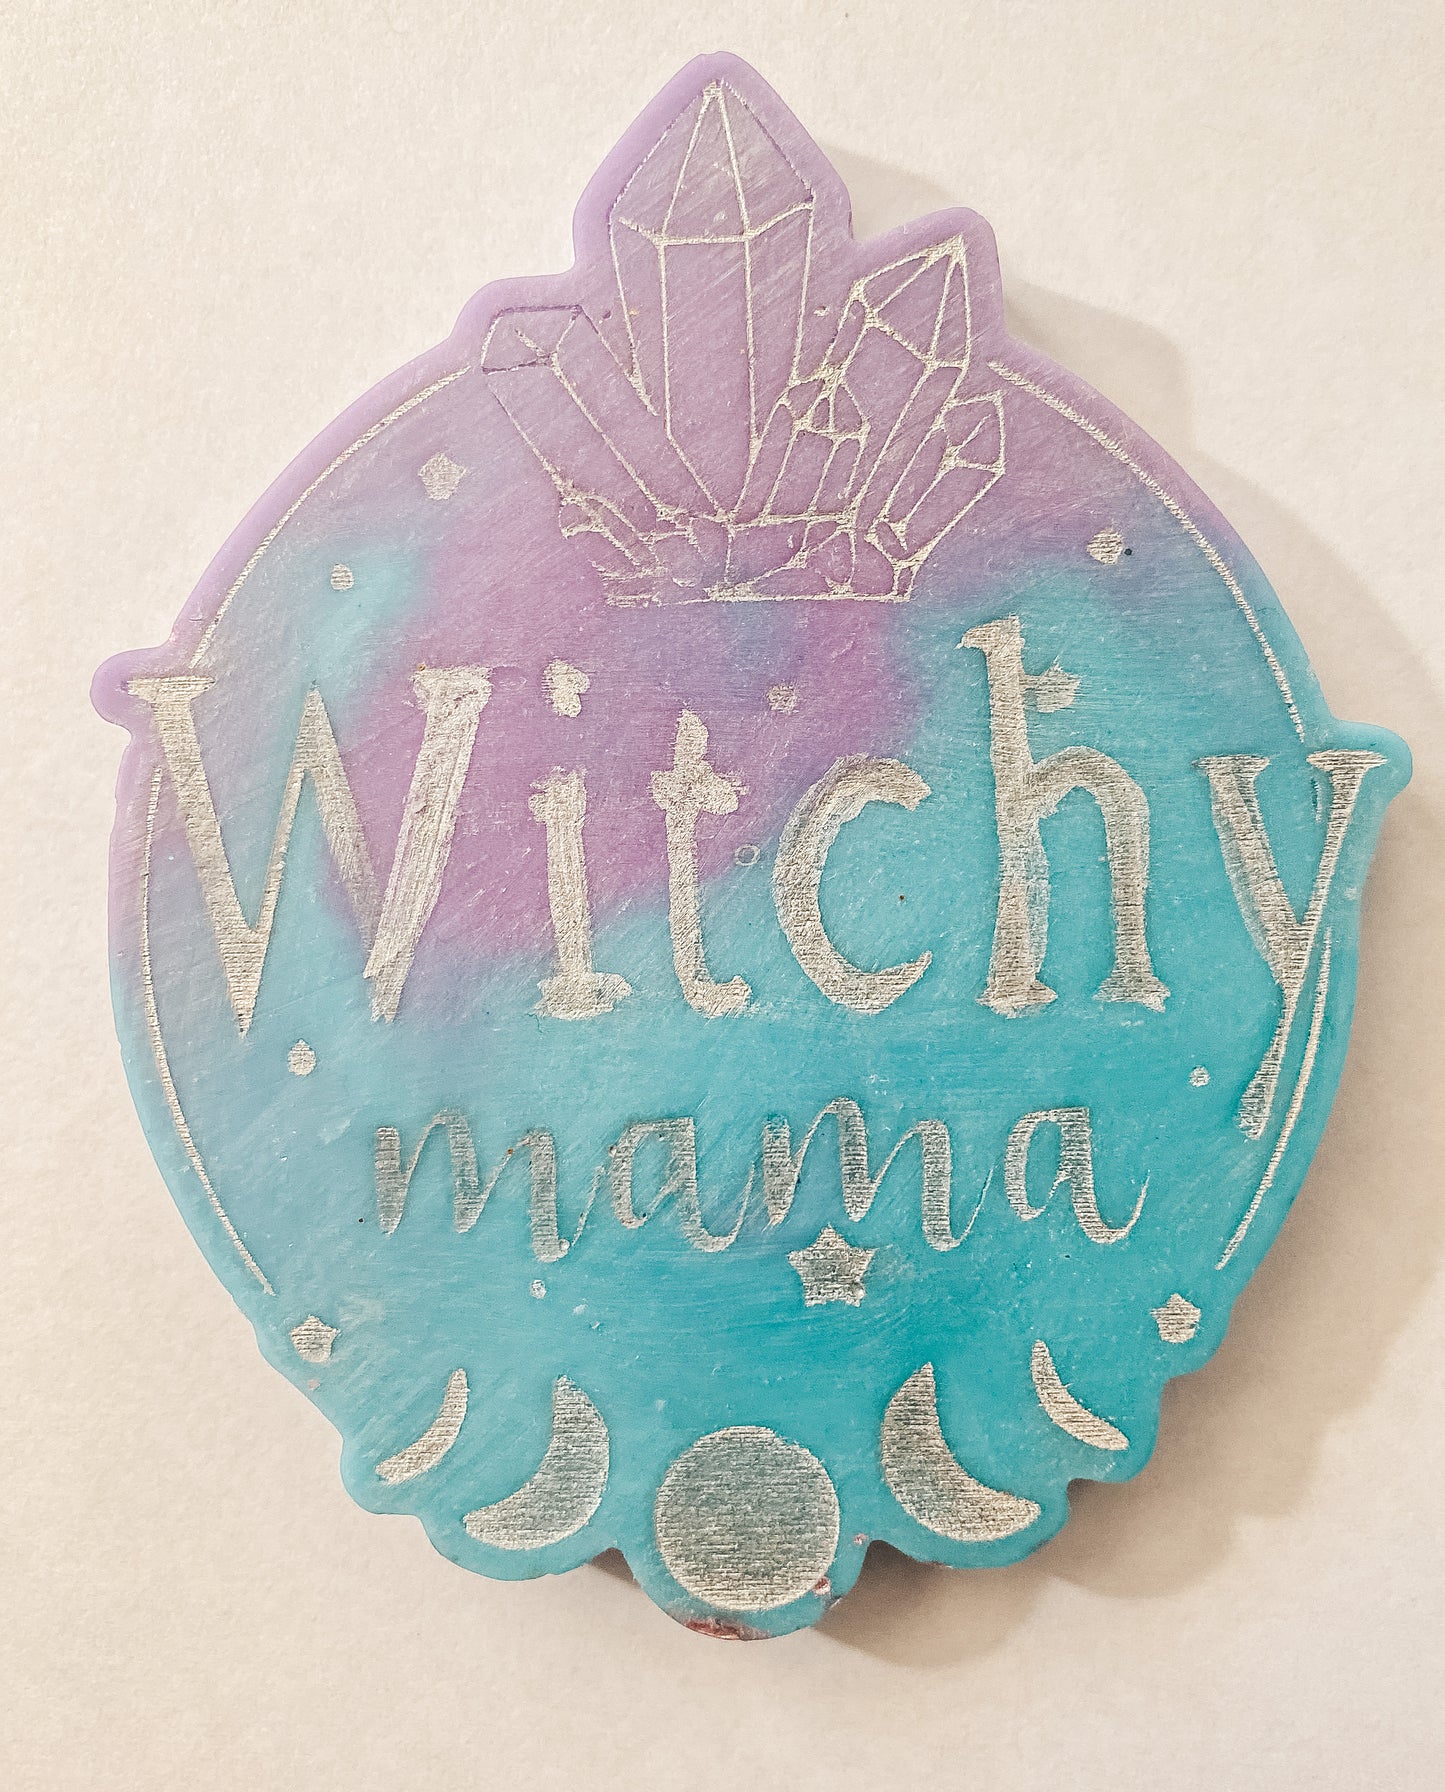 Witchy mama